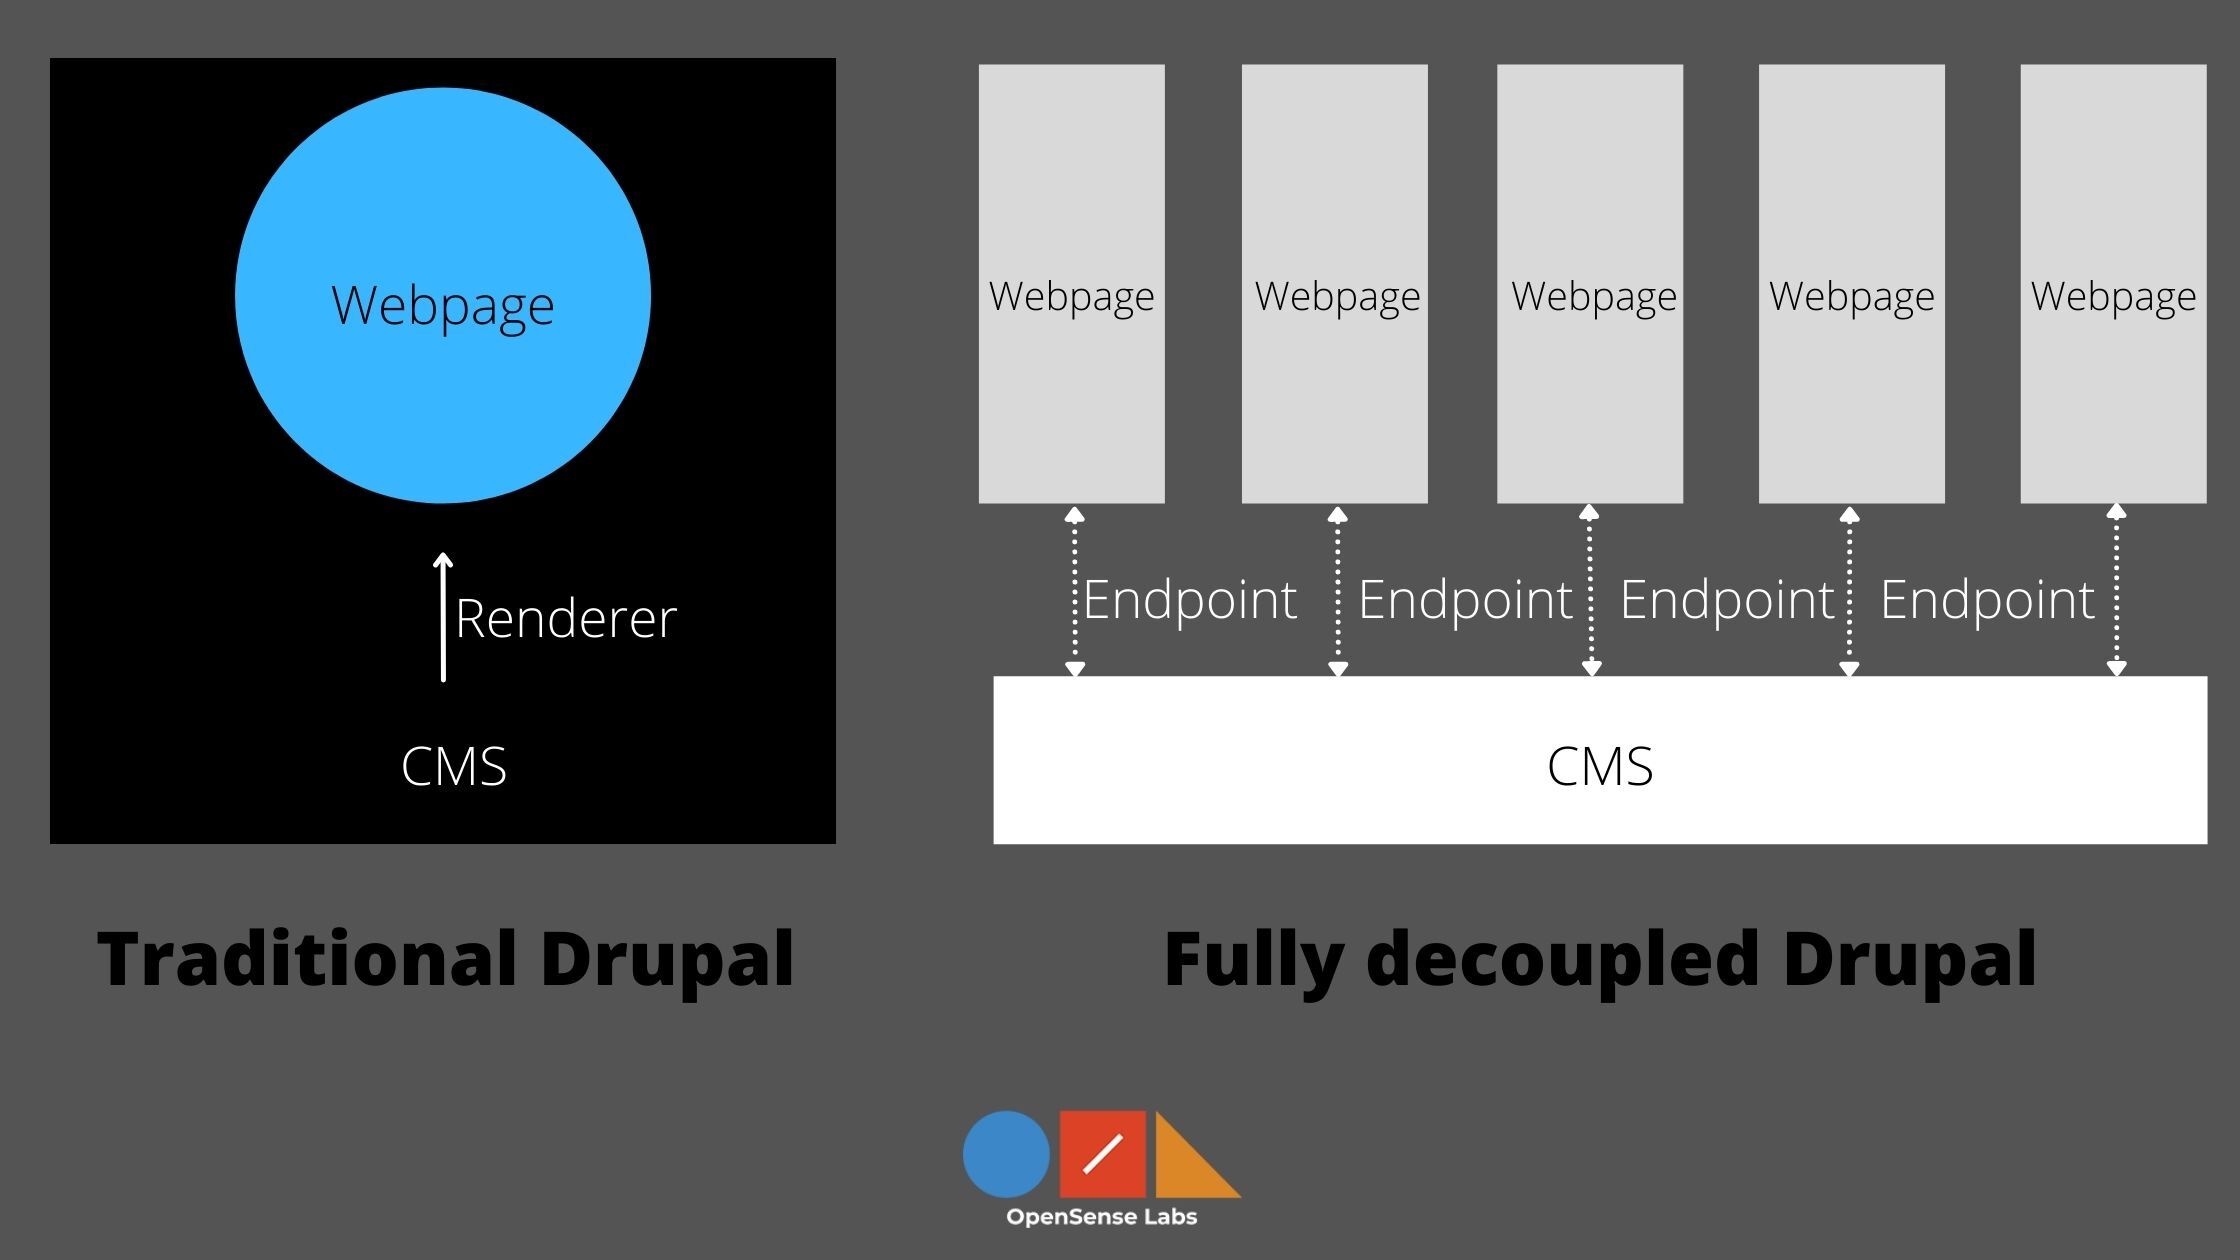 Illustration diagram describing the web page design features in both Traditional Drupal and Fully decoupled Drupal